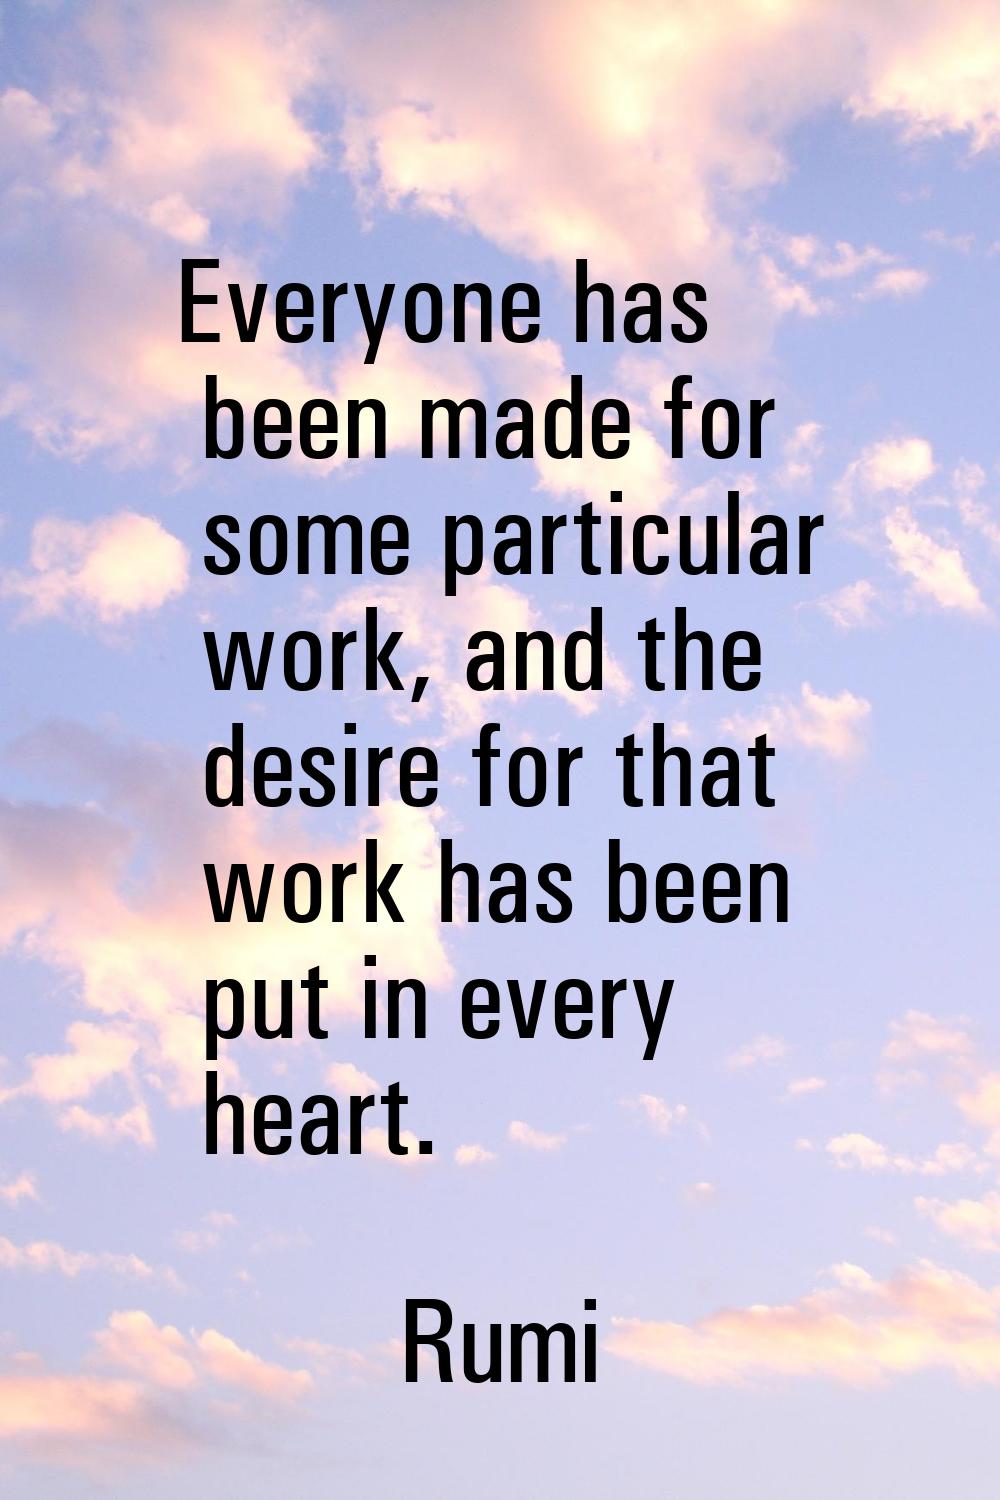 Everyone has been made for some particular work, and the desire for that work has been put in every